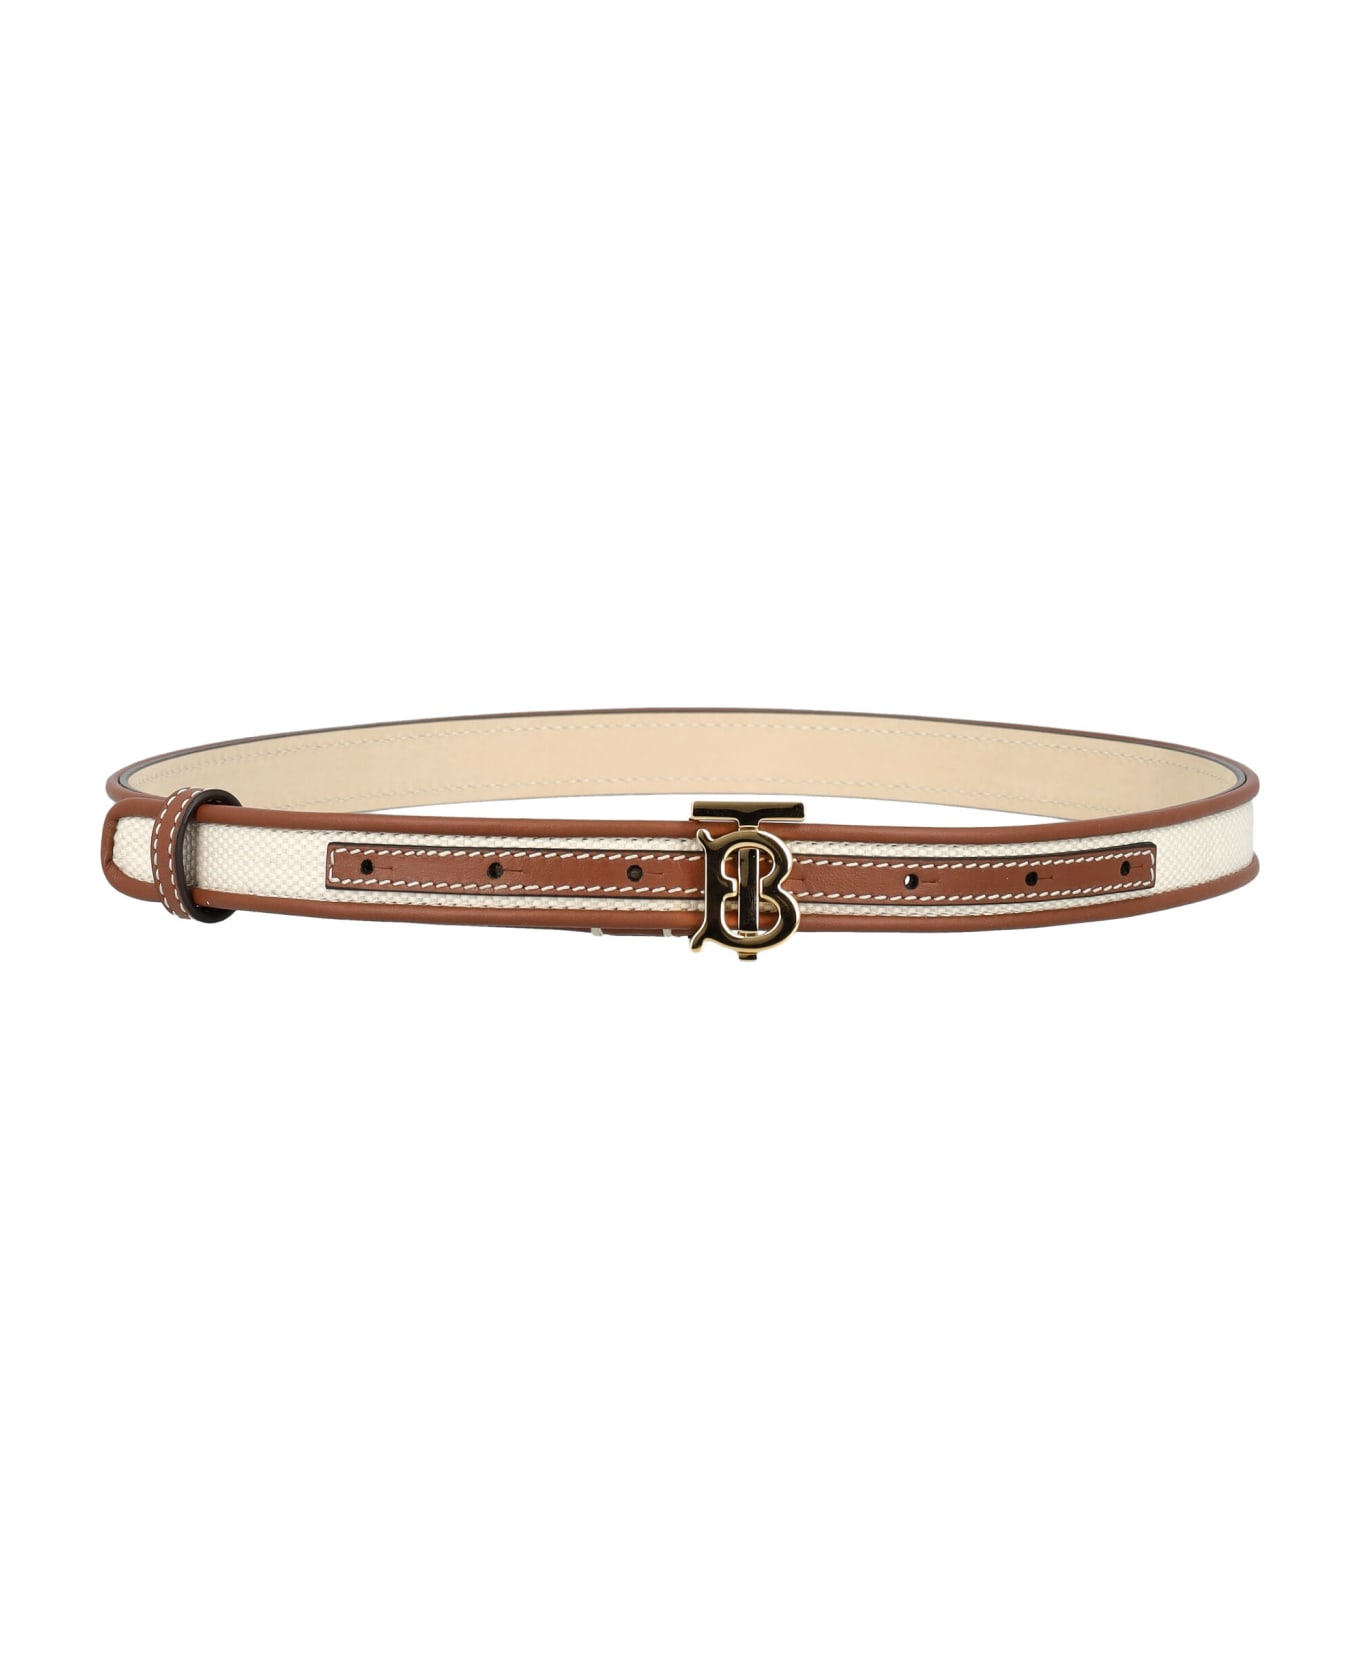 Burberry London Canvas And Leather Tb Belt - NATURAL / TAN